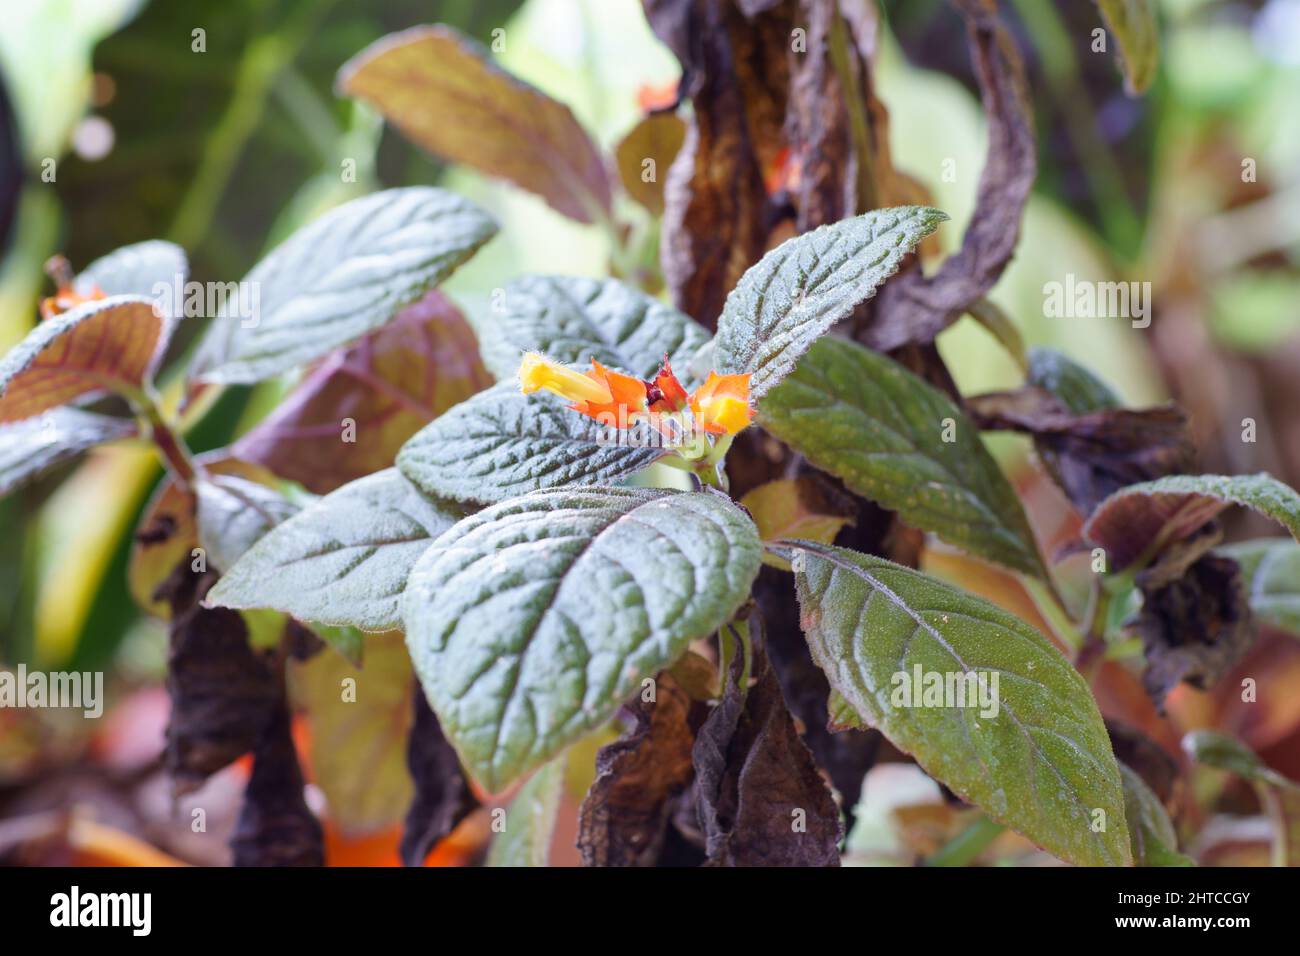 Closeup of the orange sunset bells blossom on a stem with green leaves Stock Photo